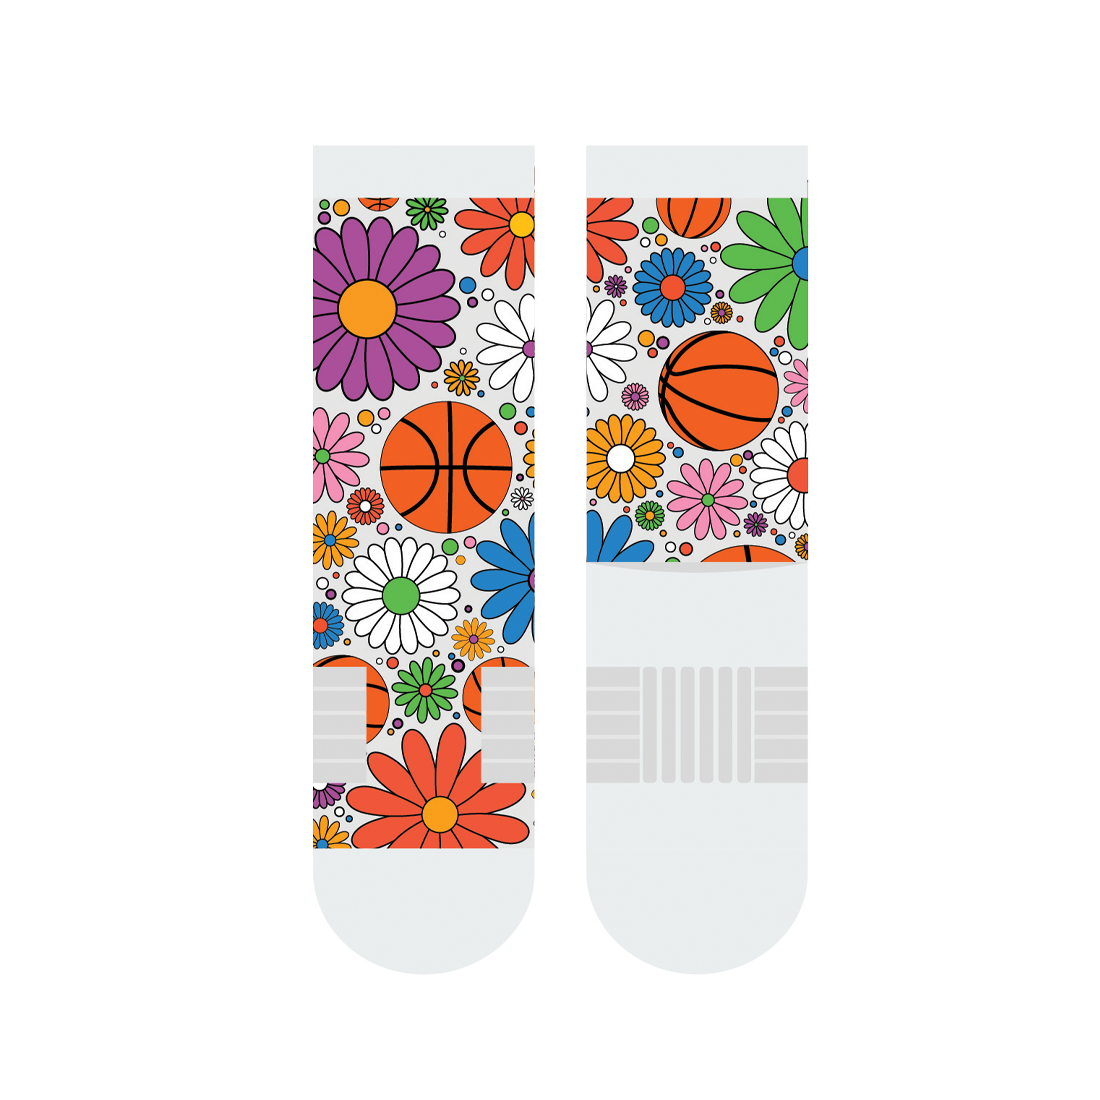 Variety 2 Pack - White and Black Basketball Daisy Socks - Buy 2 and Save!